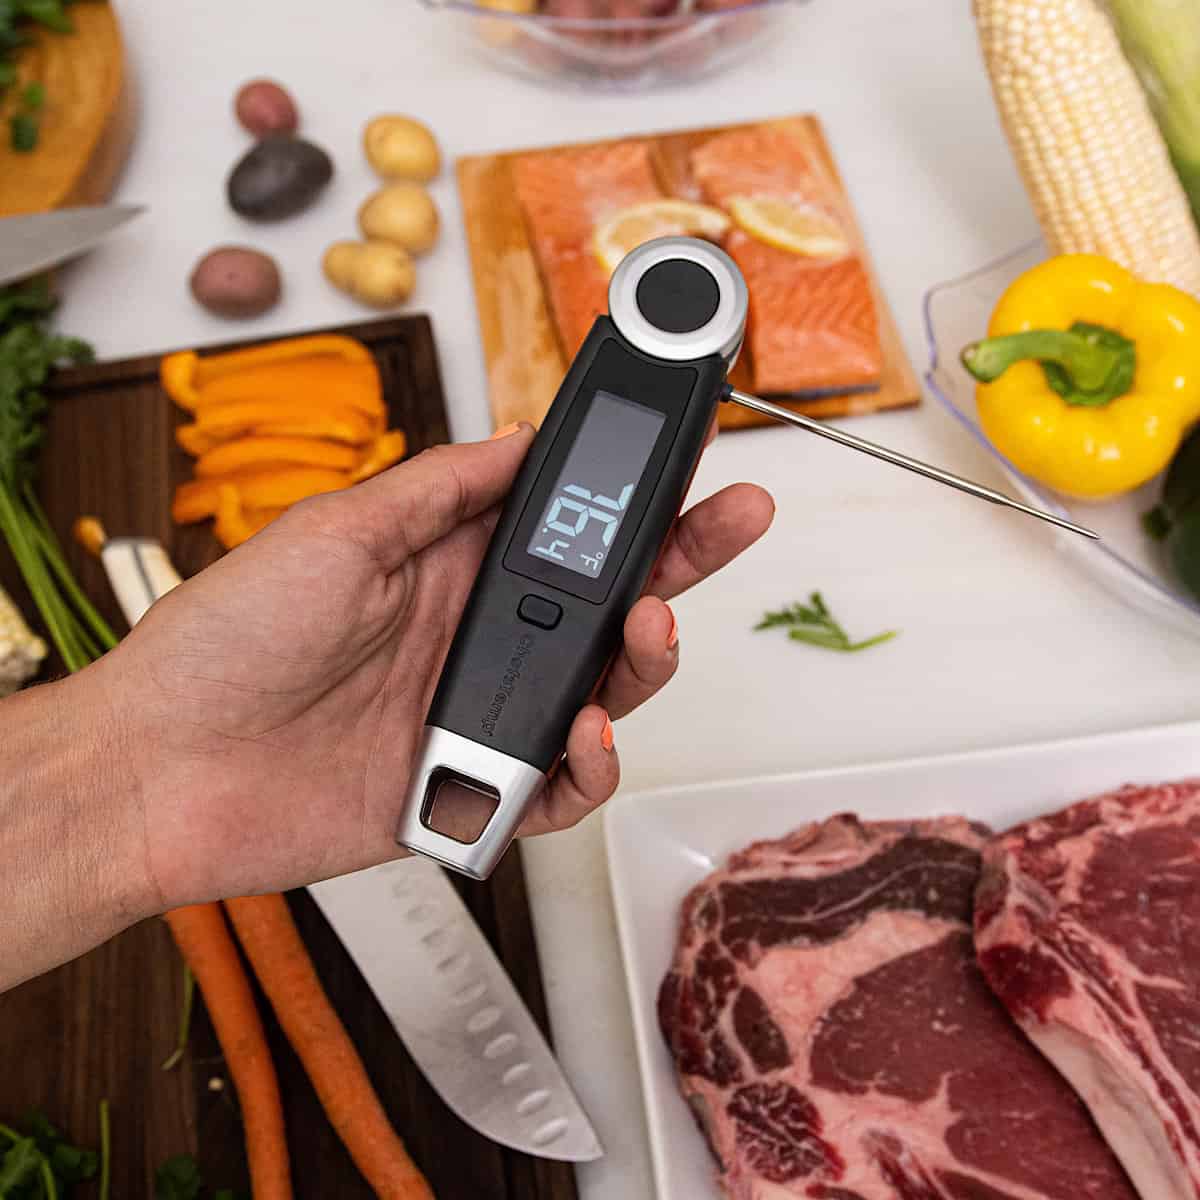 https://www.chefstemp.com/wp-content/uploads/2020/04/Finaltouch-X10-instant-food-thermometer.jpg